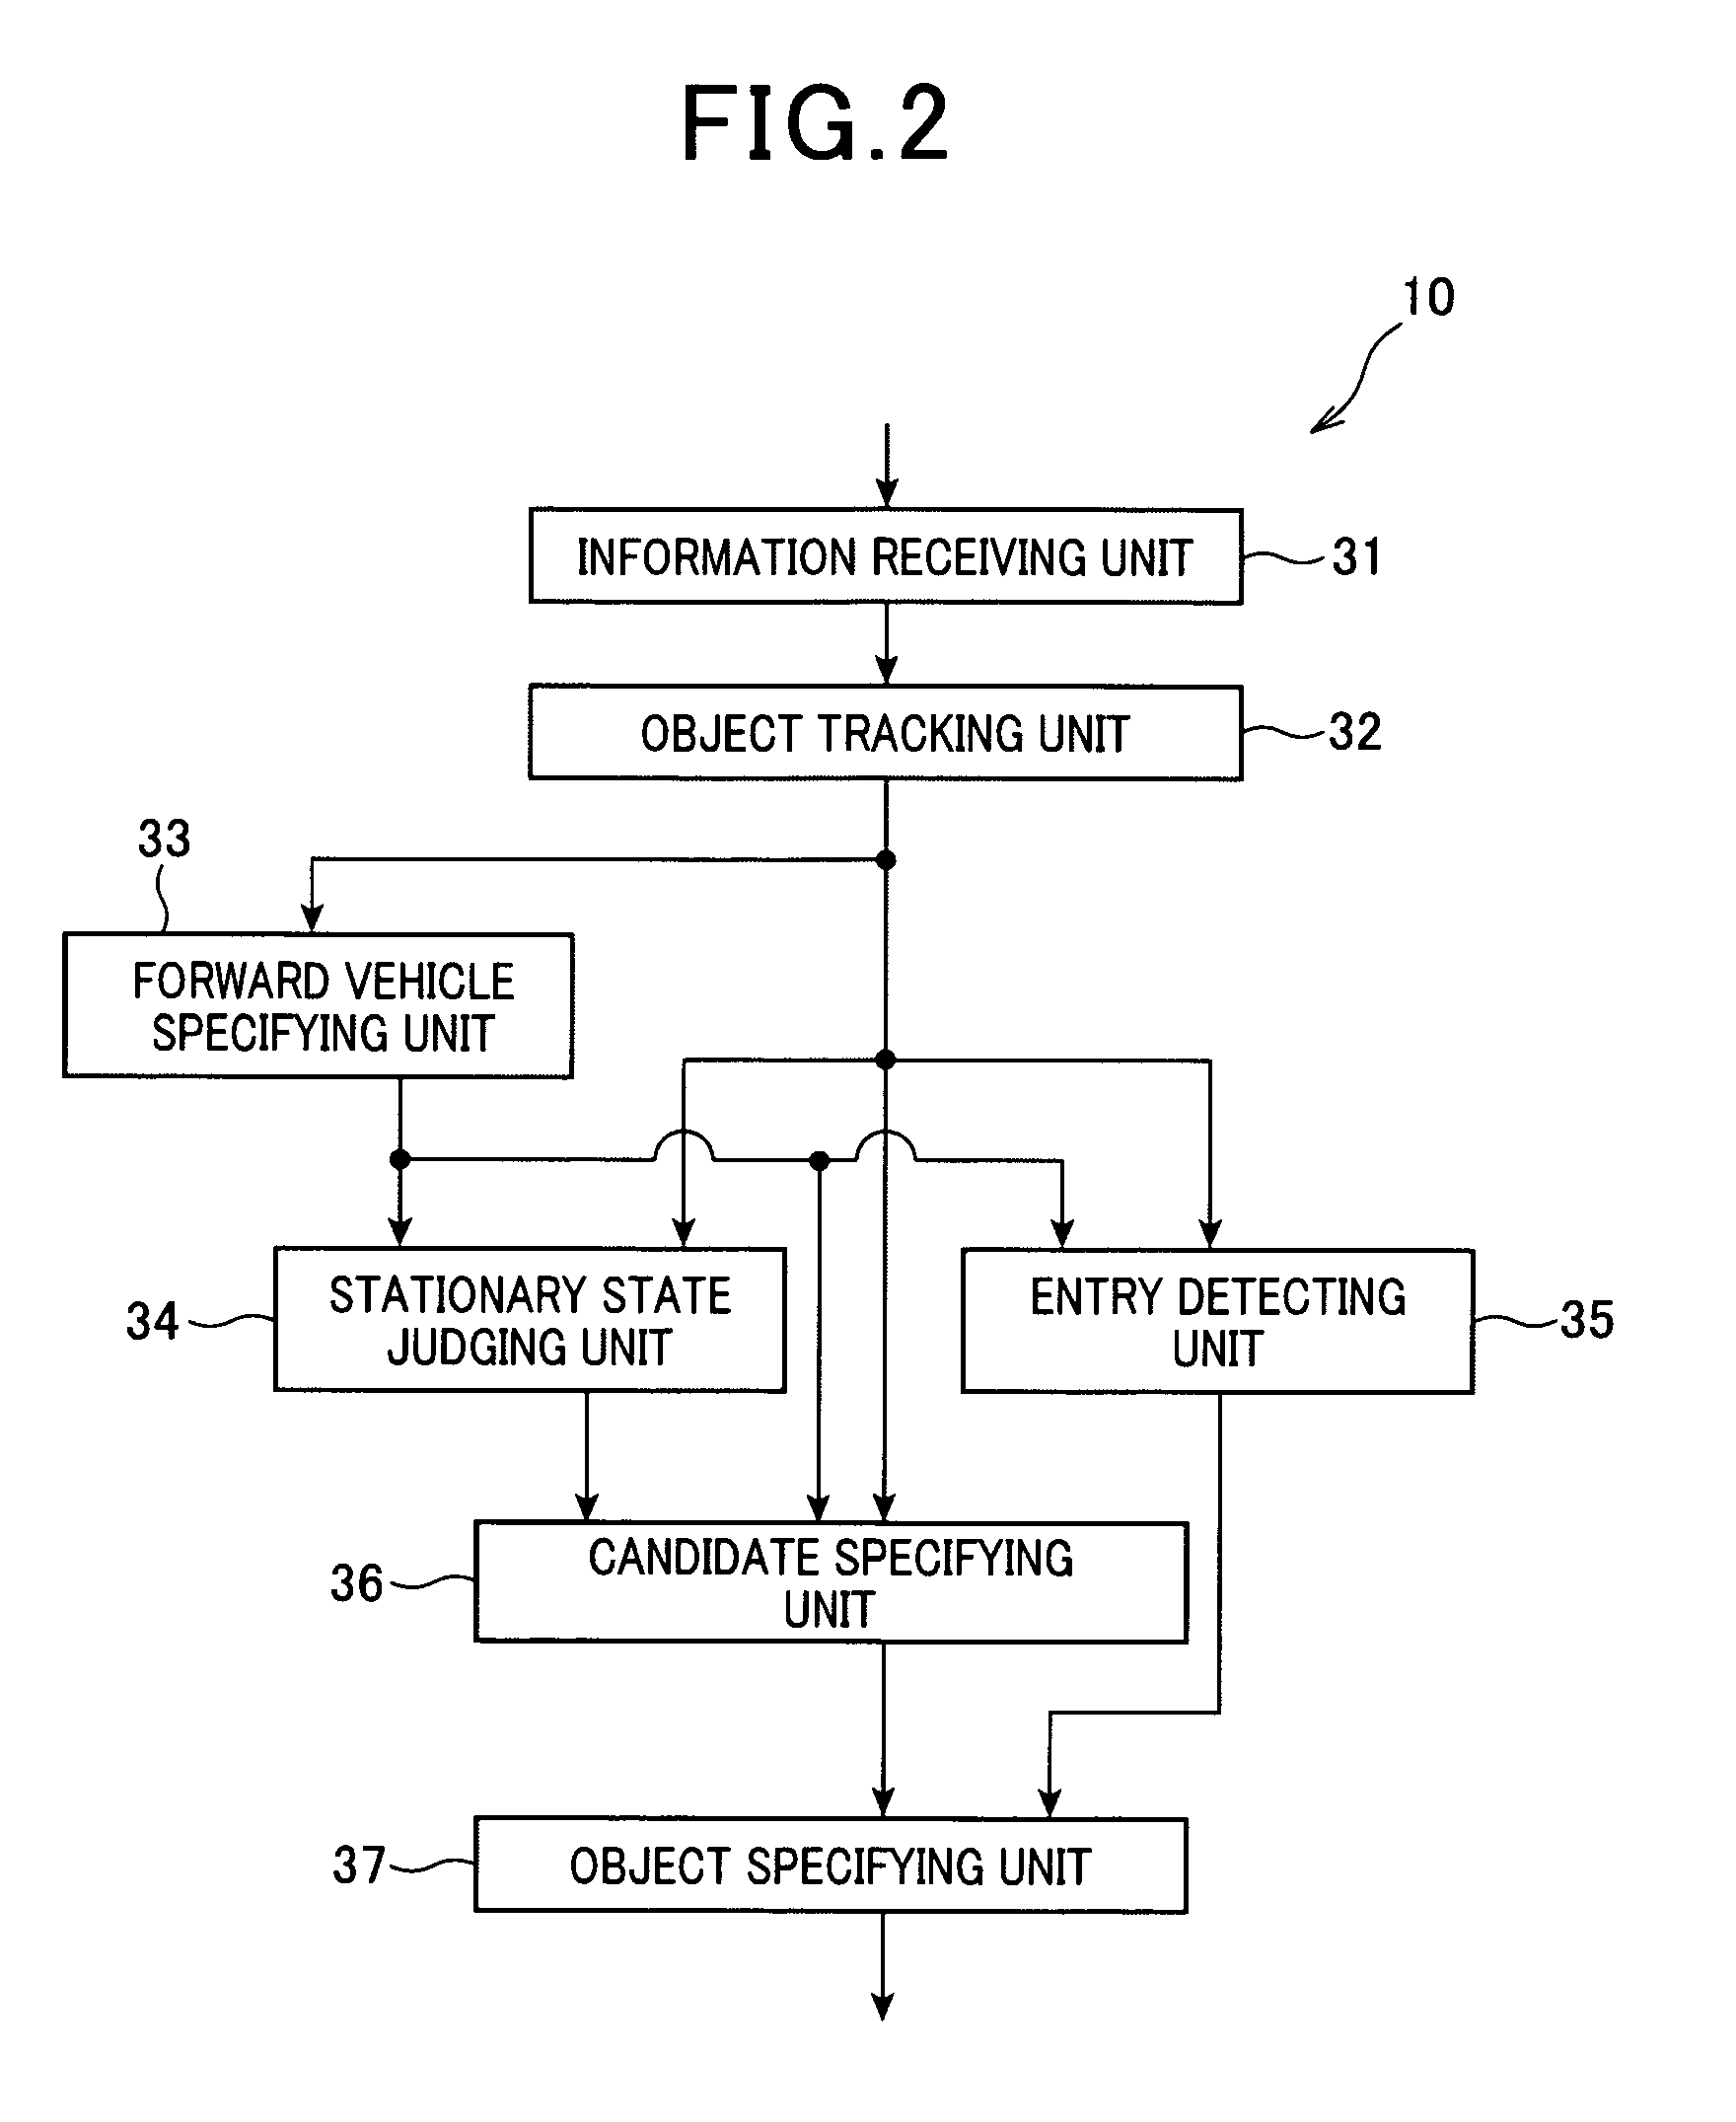 Object specifying device for a vehicle